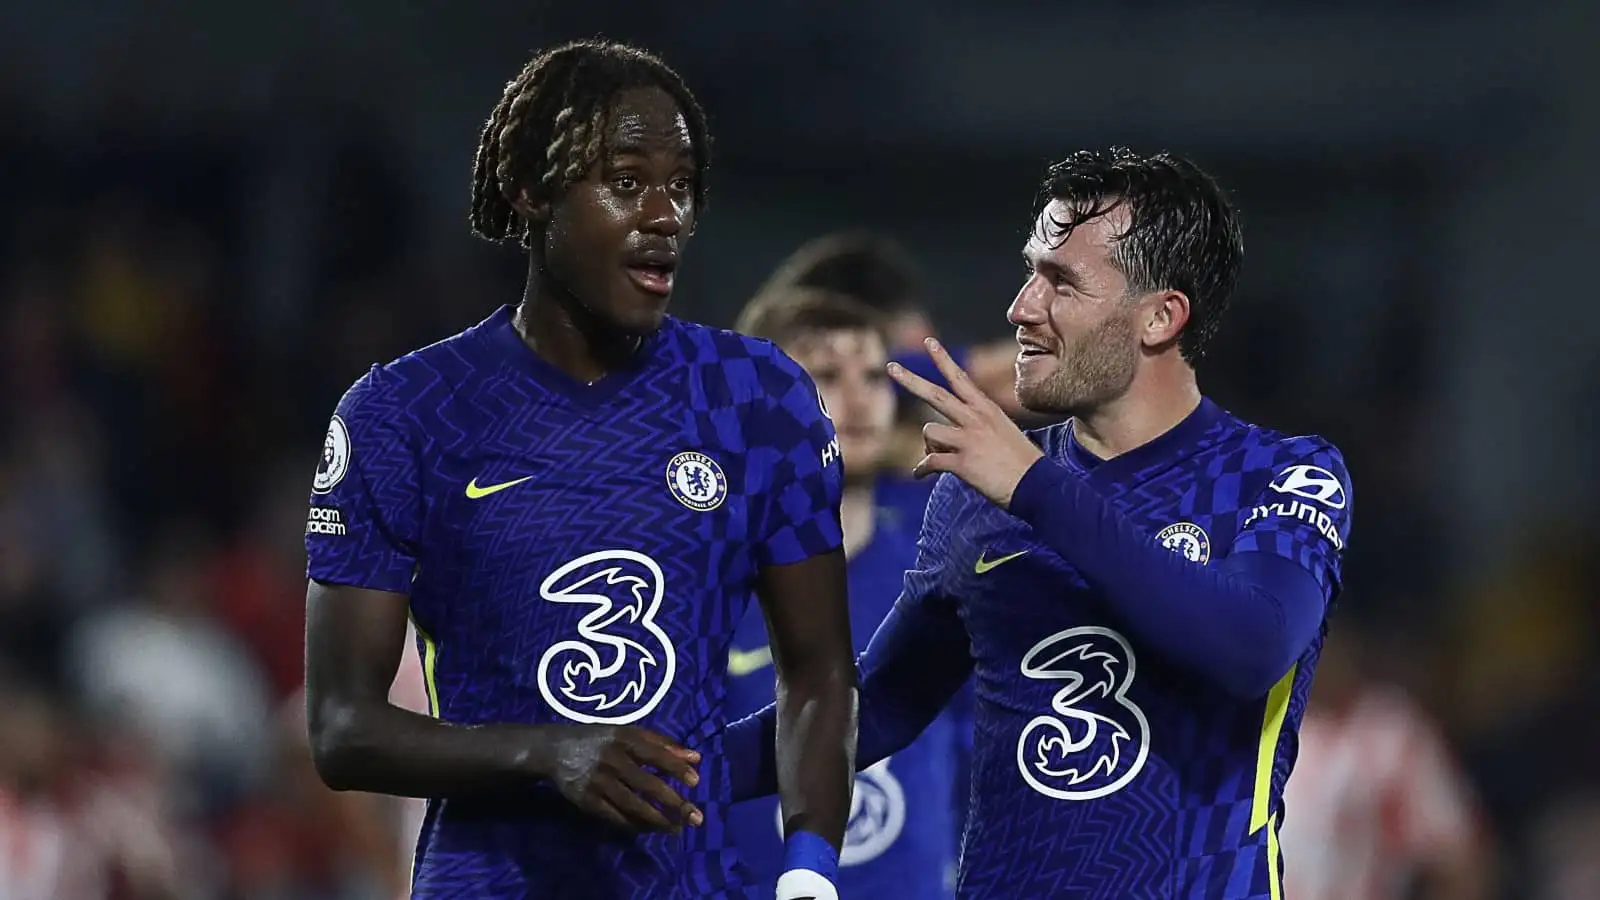 Ben Chilwell speaks with Trevoh Chalobah